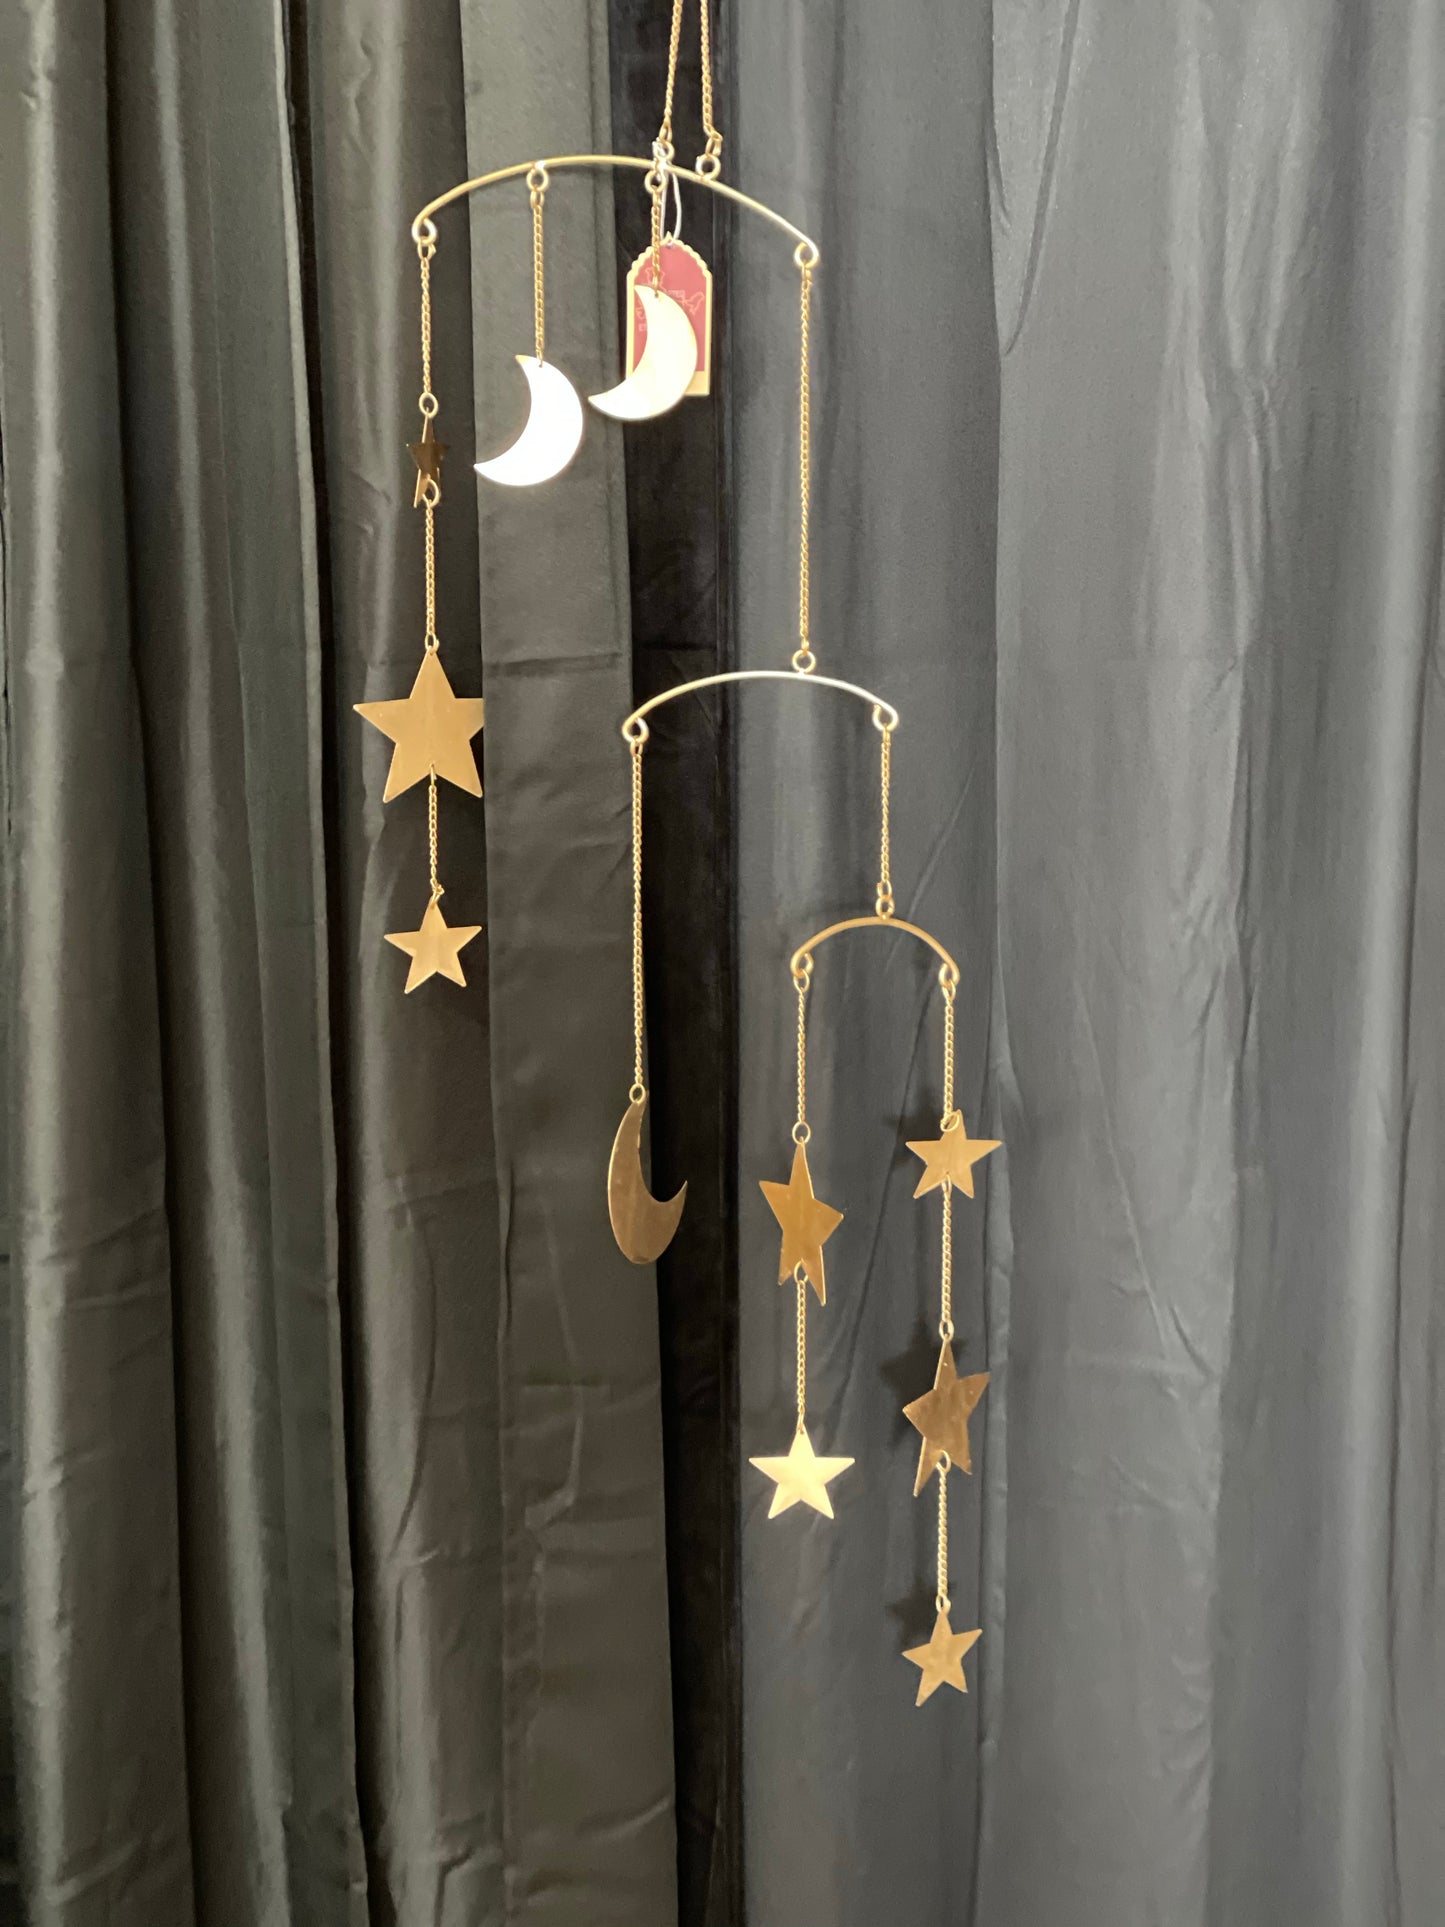 Starstruck Recycled Wind Chime / Mobile